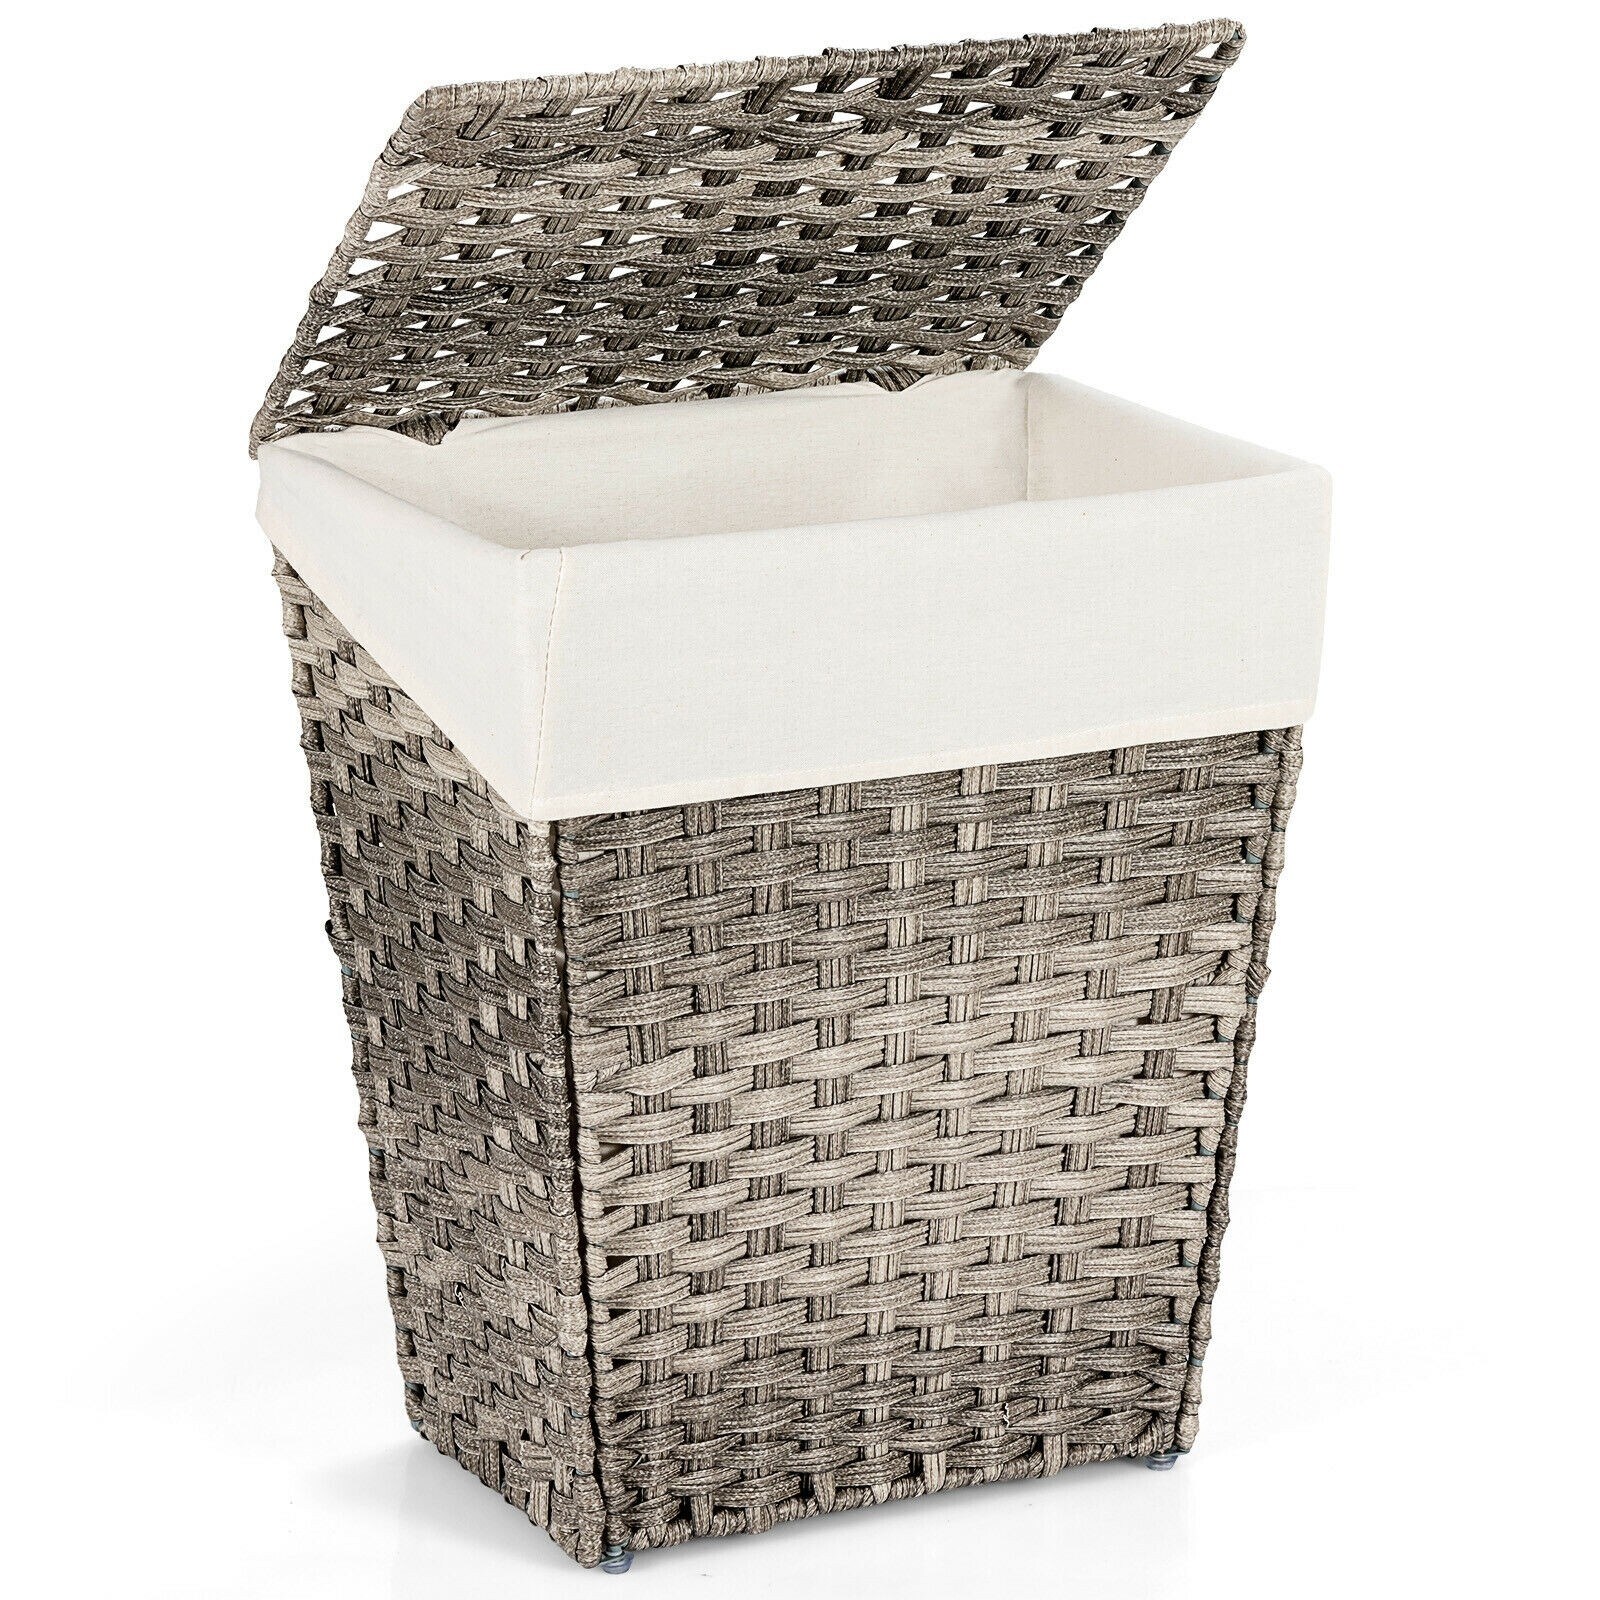 https://ak1.ostkcdn.com/images/products/is/images/direct/d823ef69544b544a5186ece8053e30504fe5219d/Foldable-Handwoven-Laundry-Hamper-with-Removable-Liner.jpg